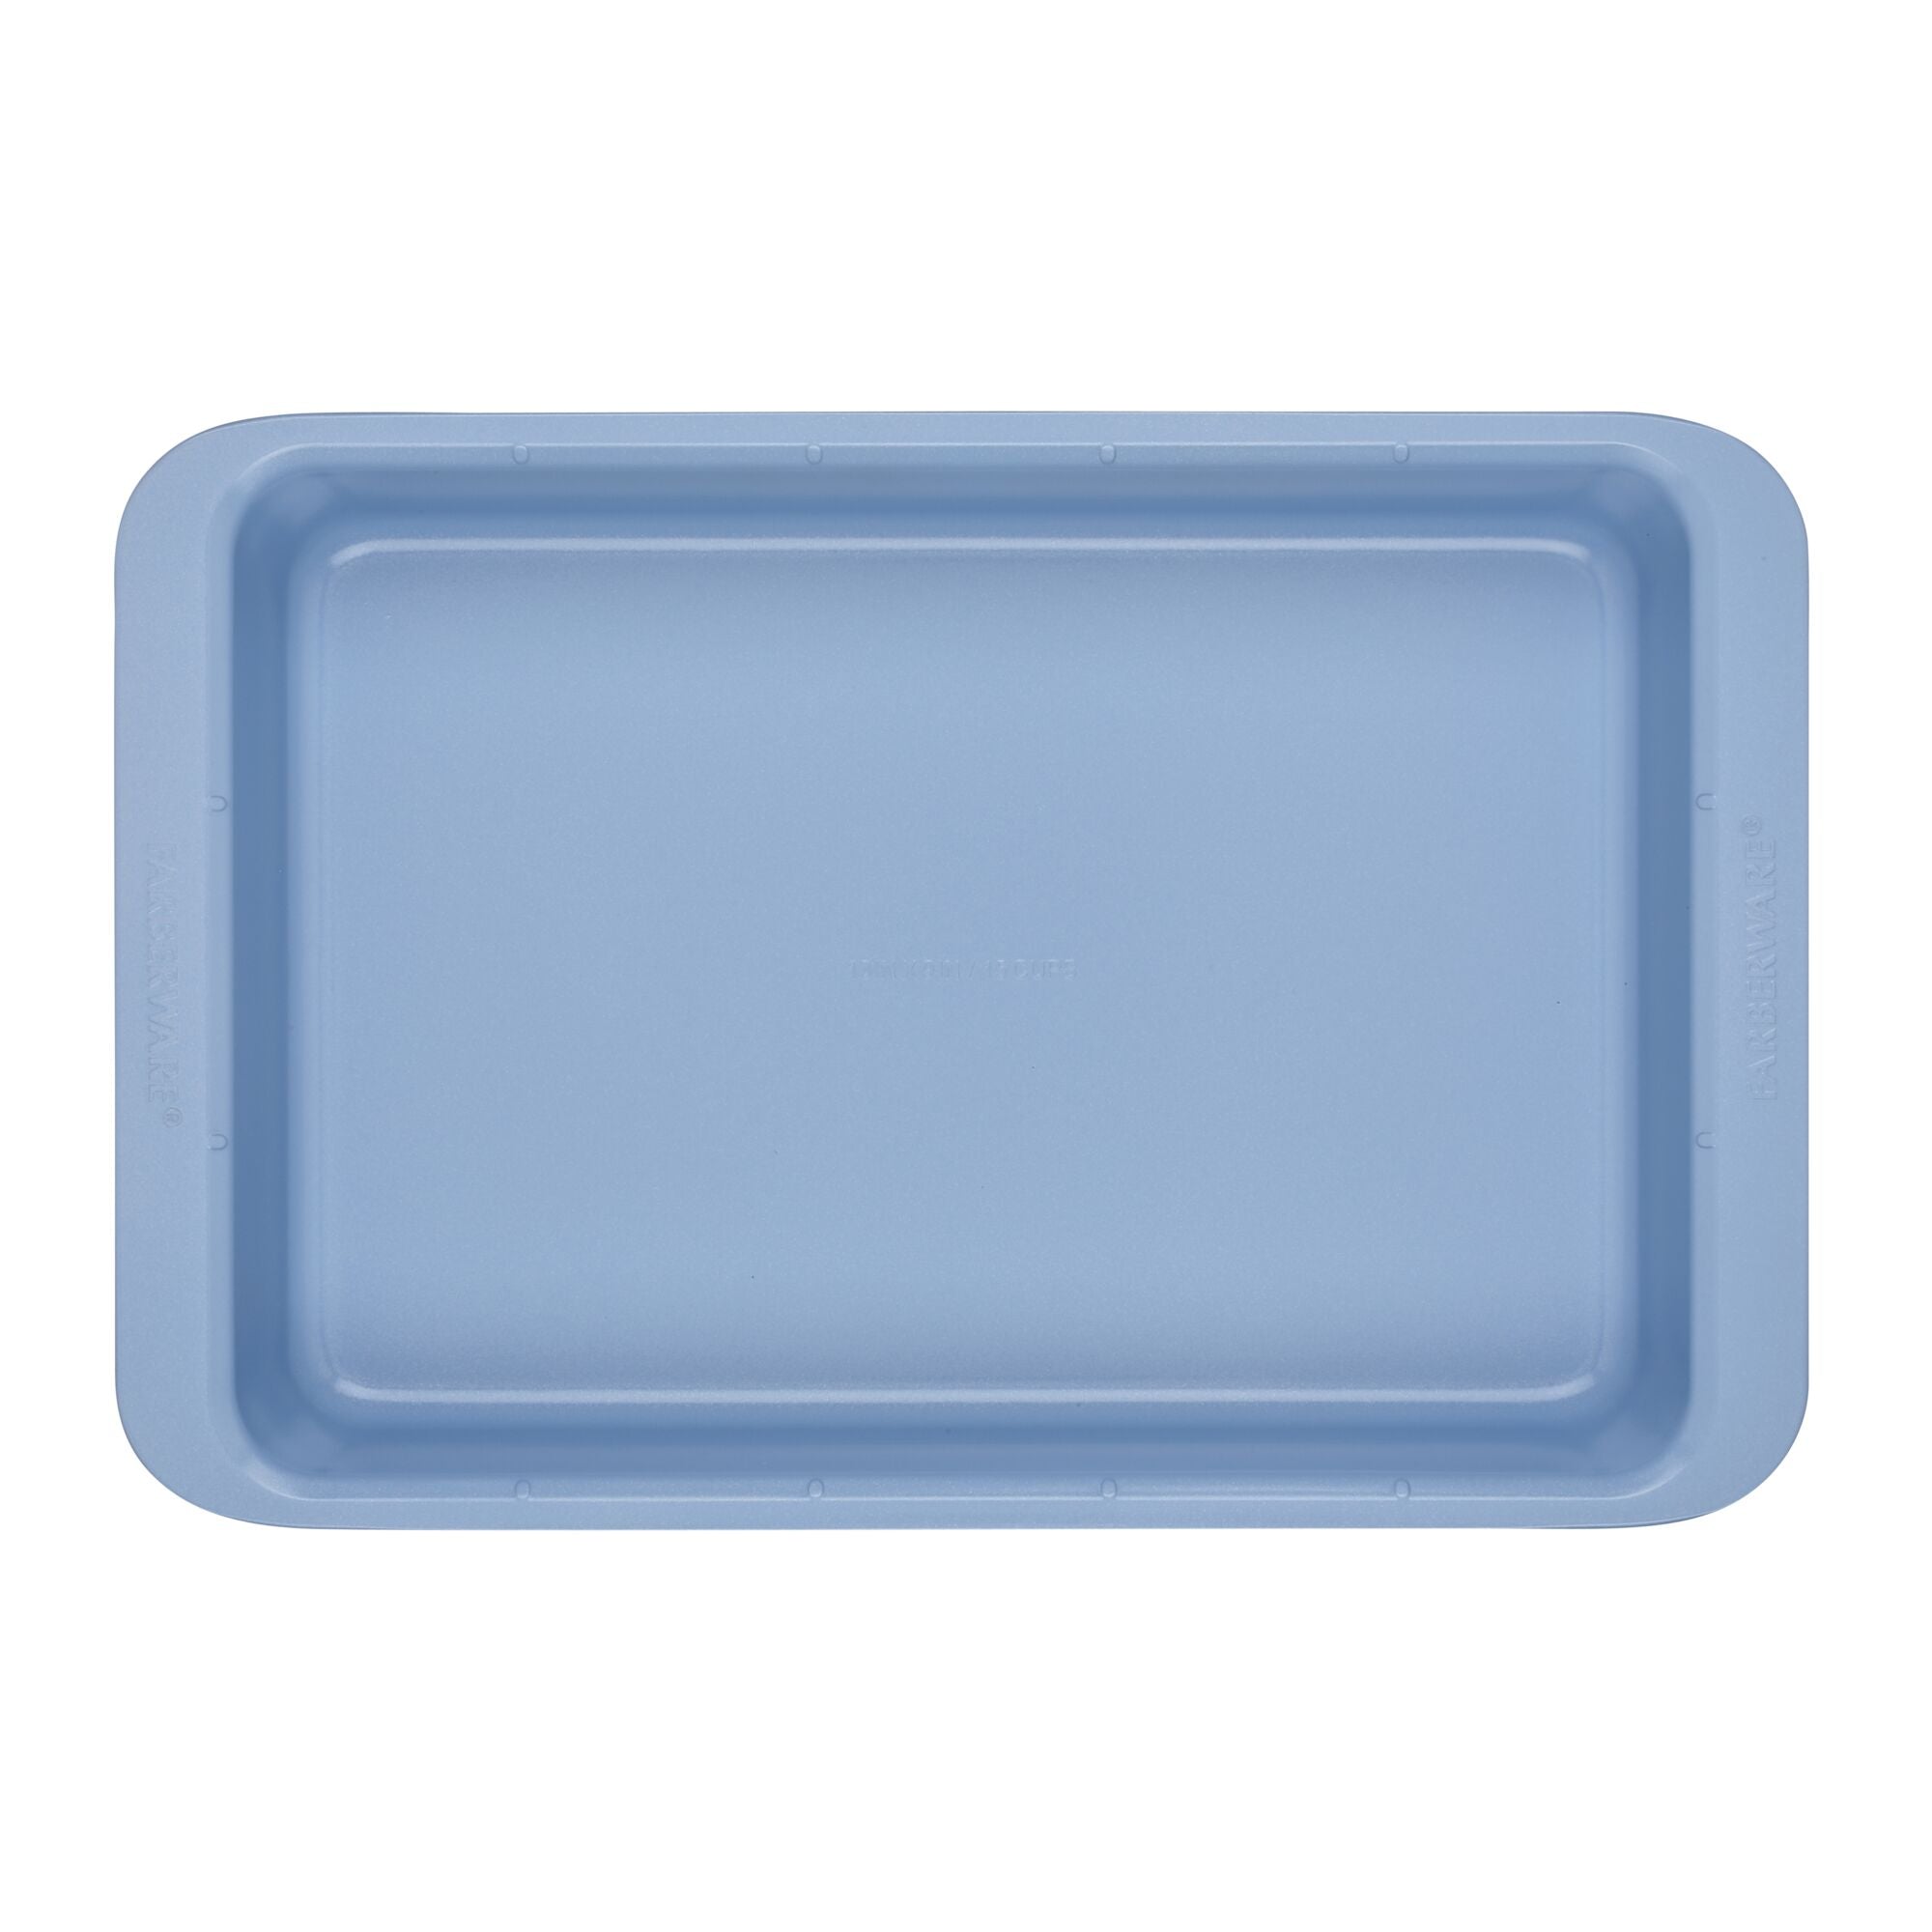 35 Pack 8 inch Square Baking Cake Pans with Plastic Lids and Non